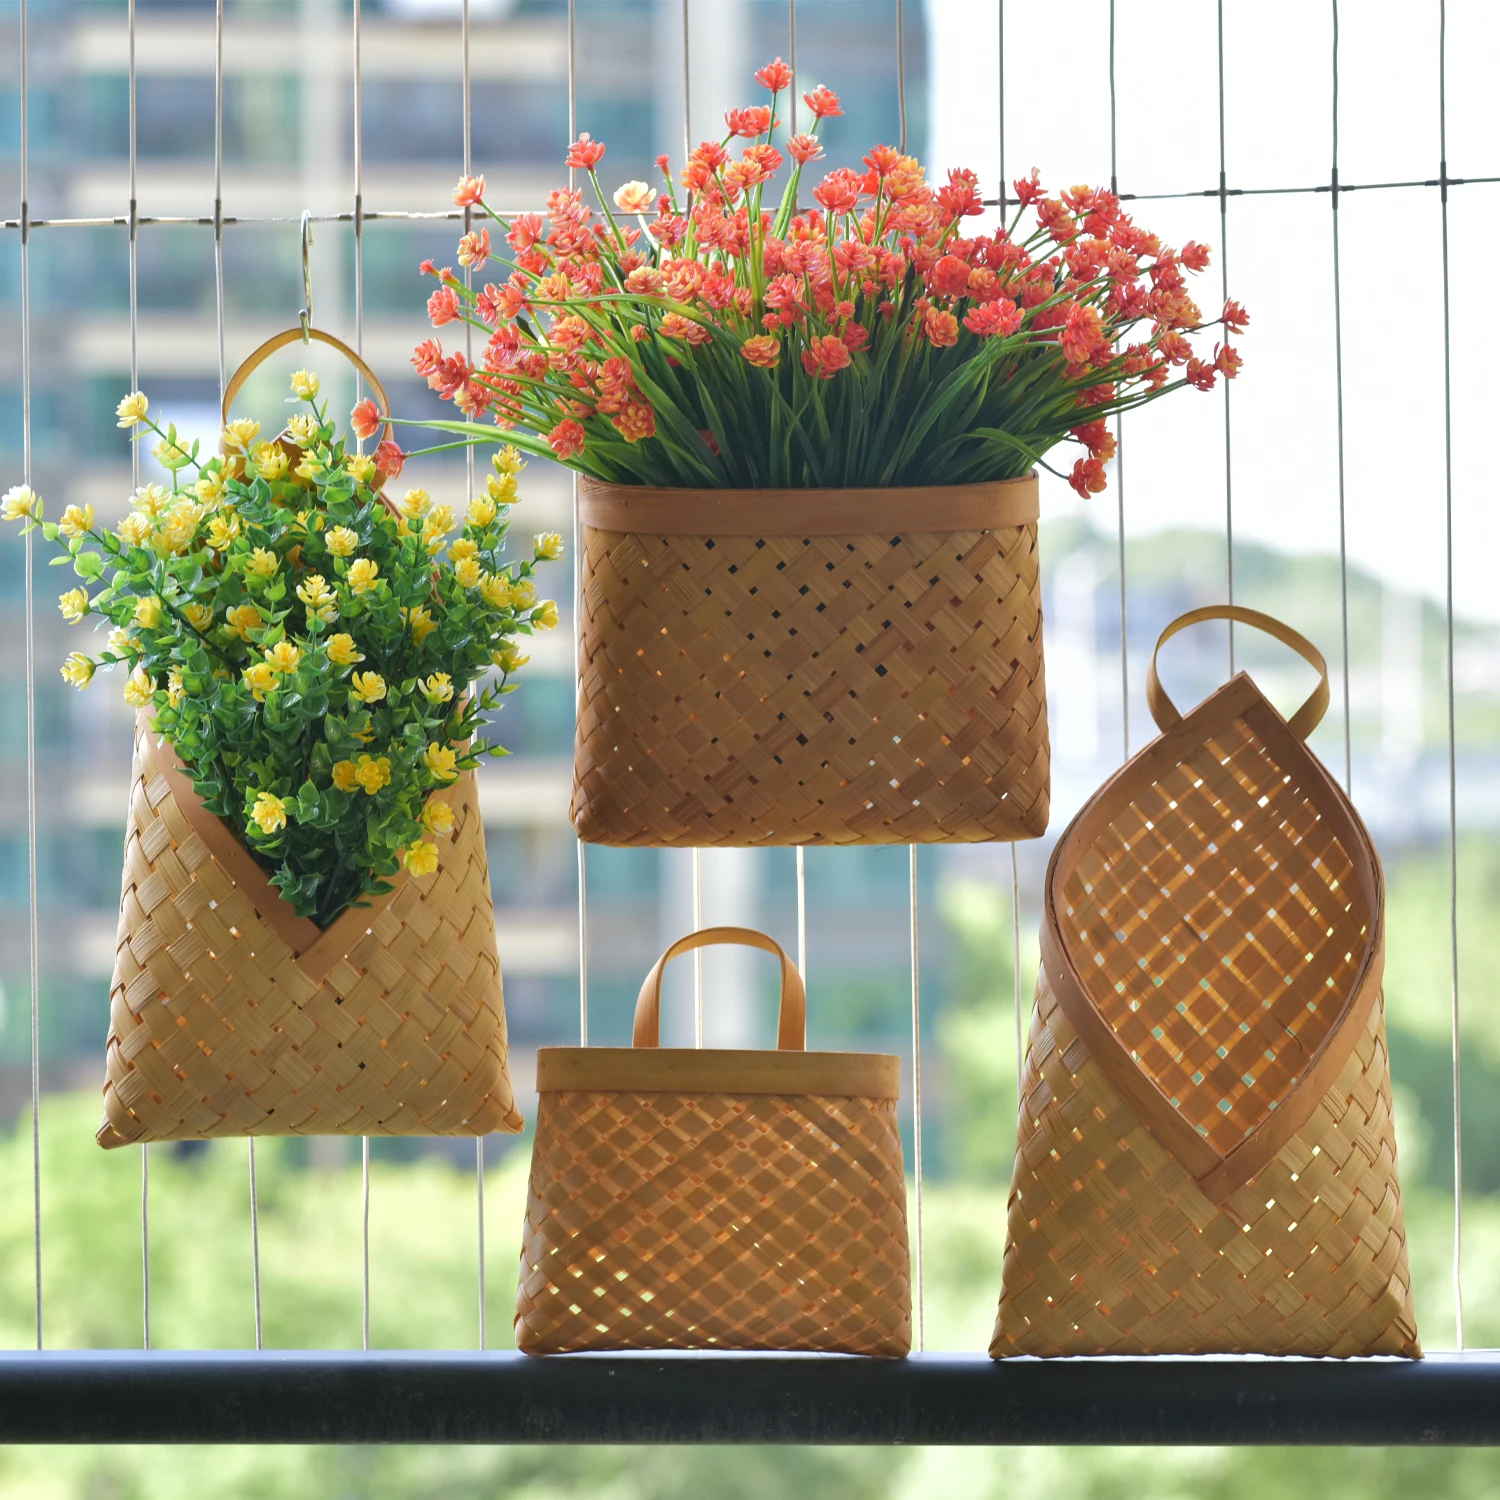 

Bamboo Wicker Hand-woven Basket Eco-Friendly Wall Hanging Vase Hand Made Flower Pot Storage Container Home Garden Decoration